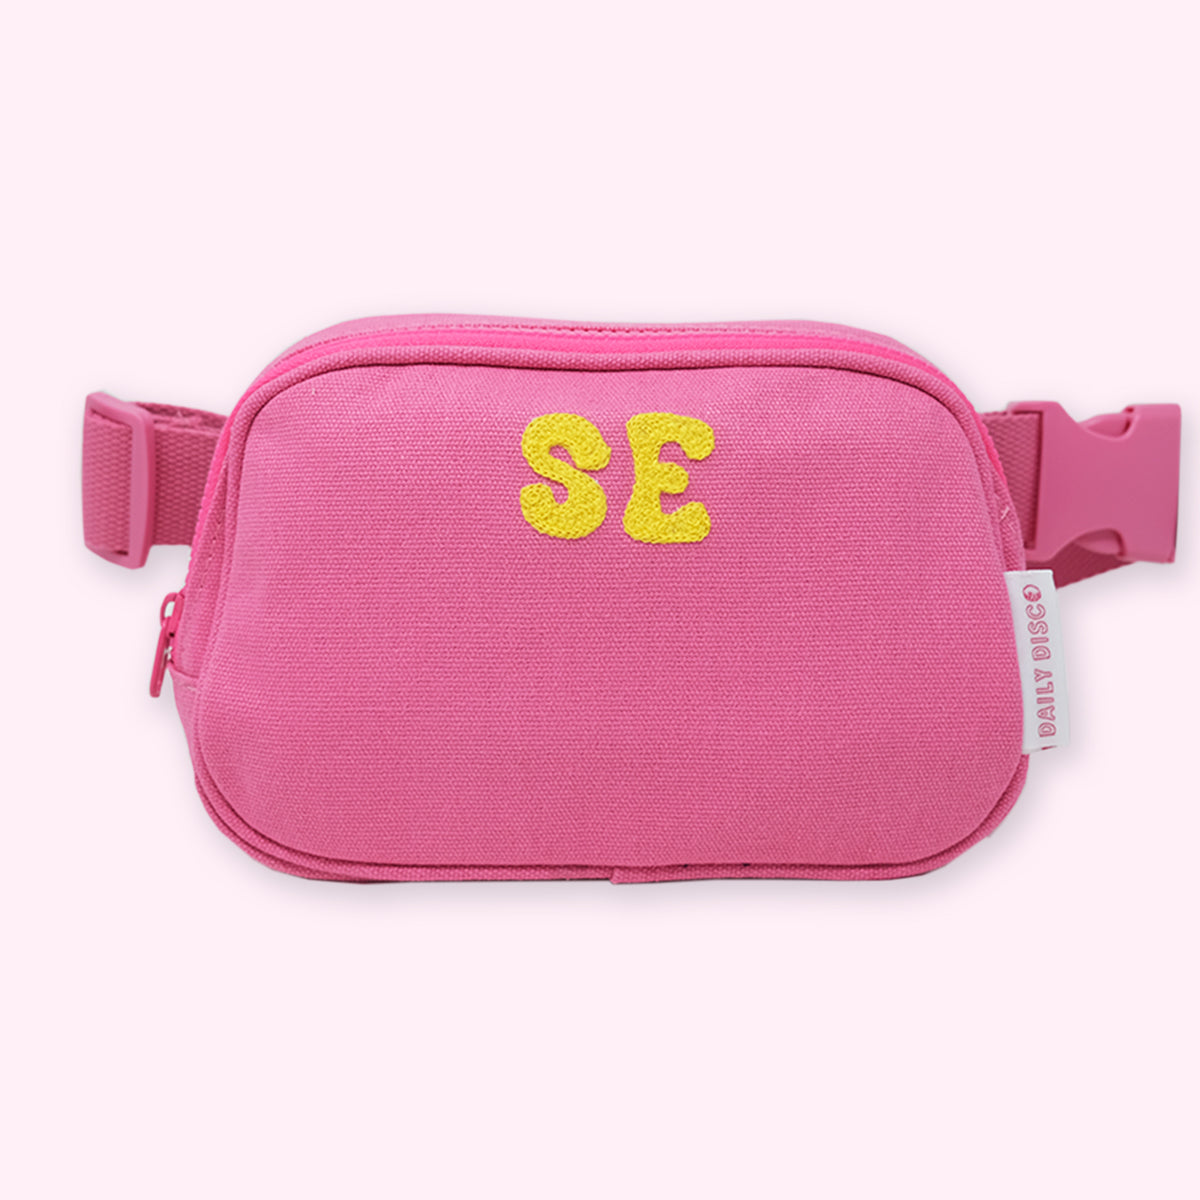 Personalized Fanny Pack- Light Blue